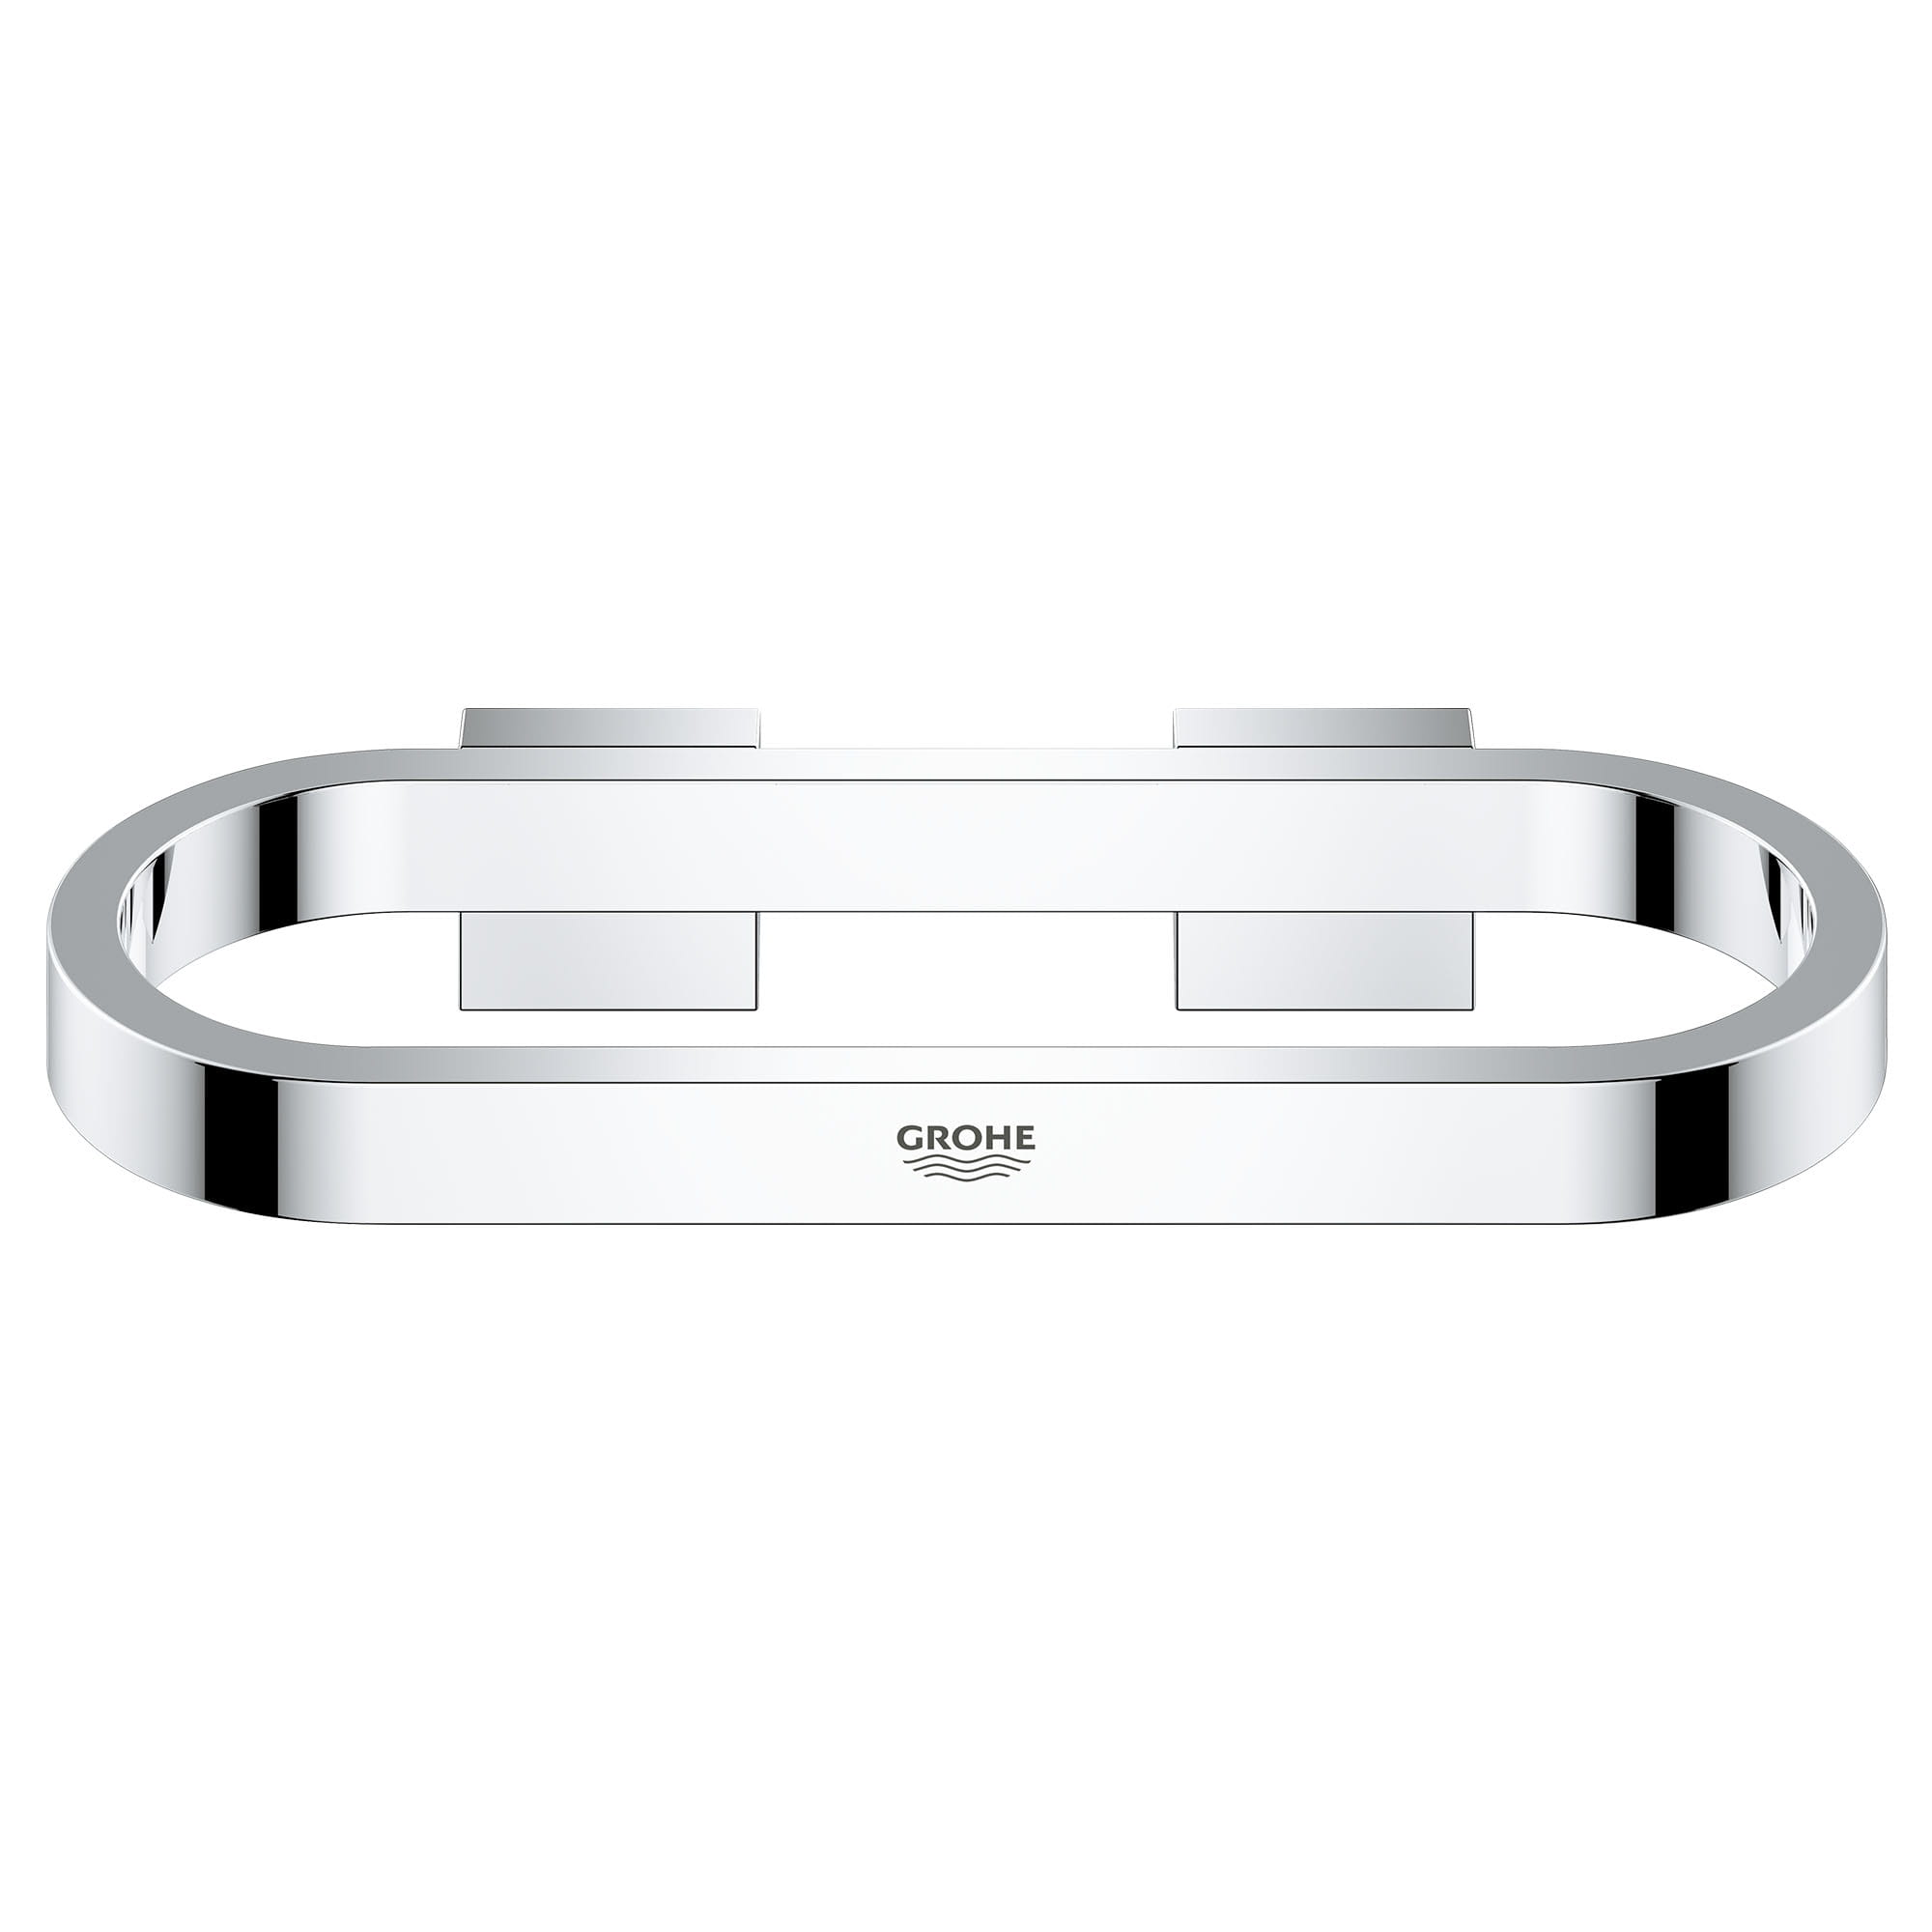 Towel Ring GROHE CHROME